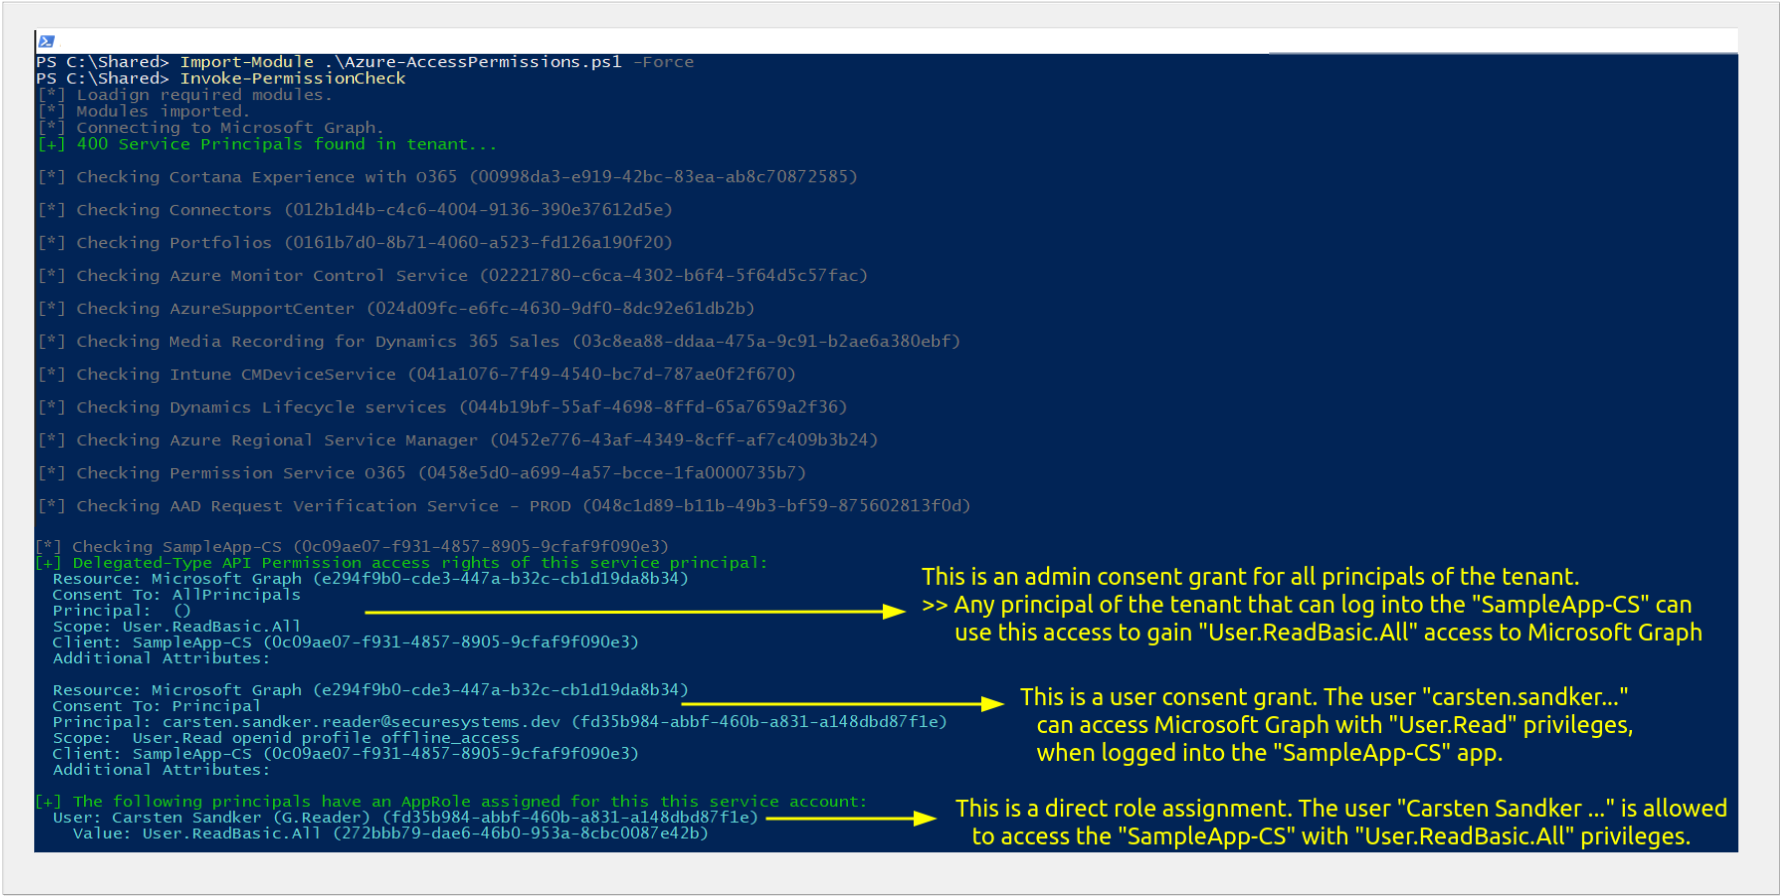 Output of Azure-AccessPermissions.ps1